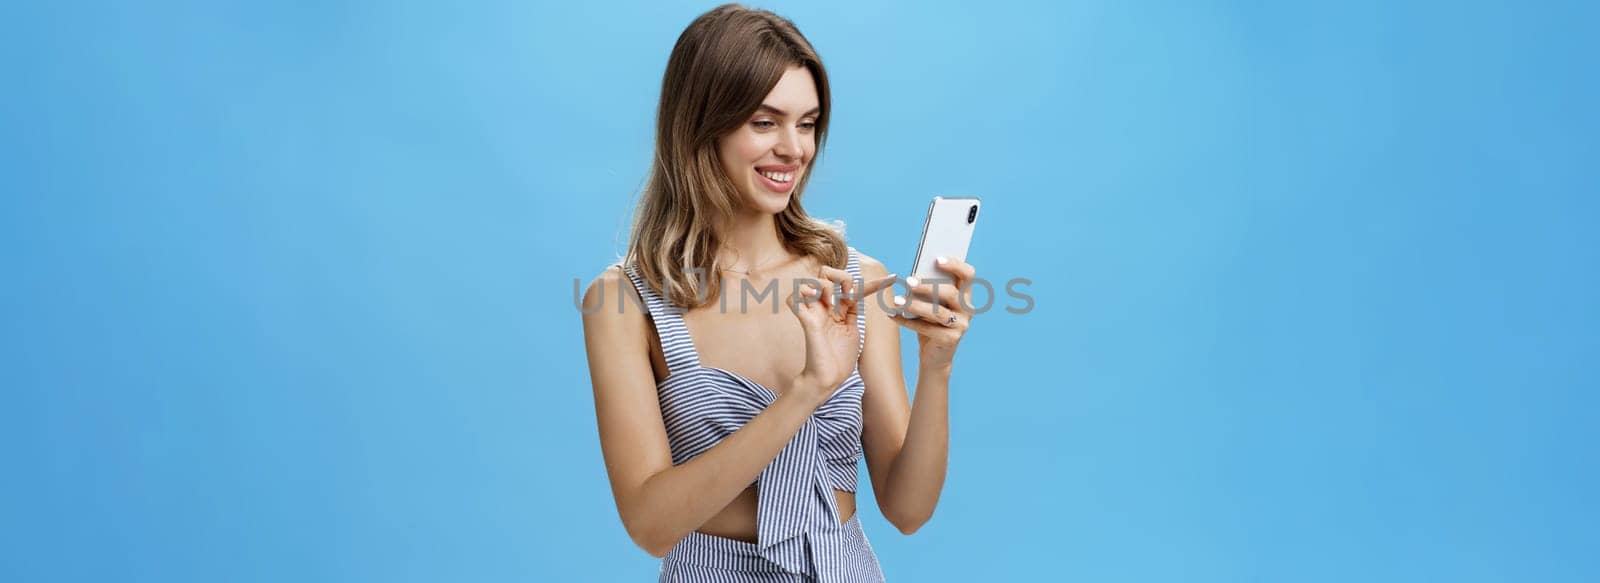 Portrait of stylish sociable good-looking female entrepreneur making appointment via smartphone holding cellphone typing message gazing at device screen with pleased carefree smile over blue wall. Technology concept